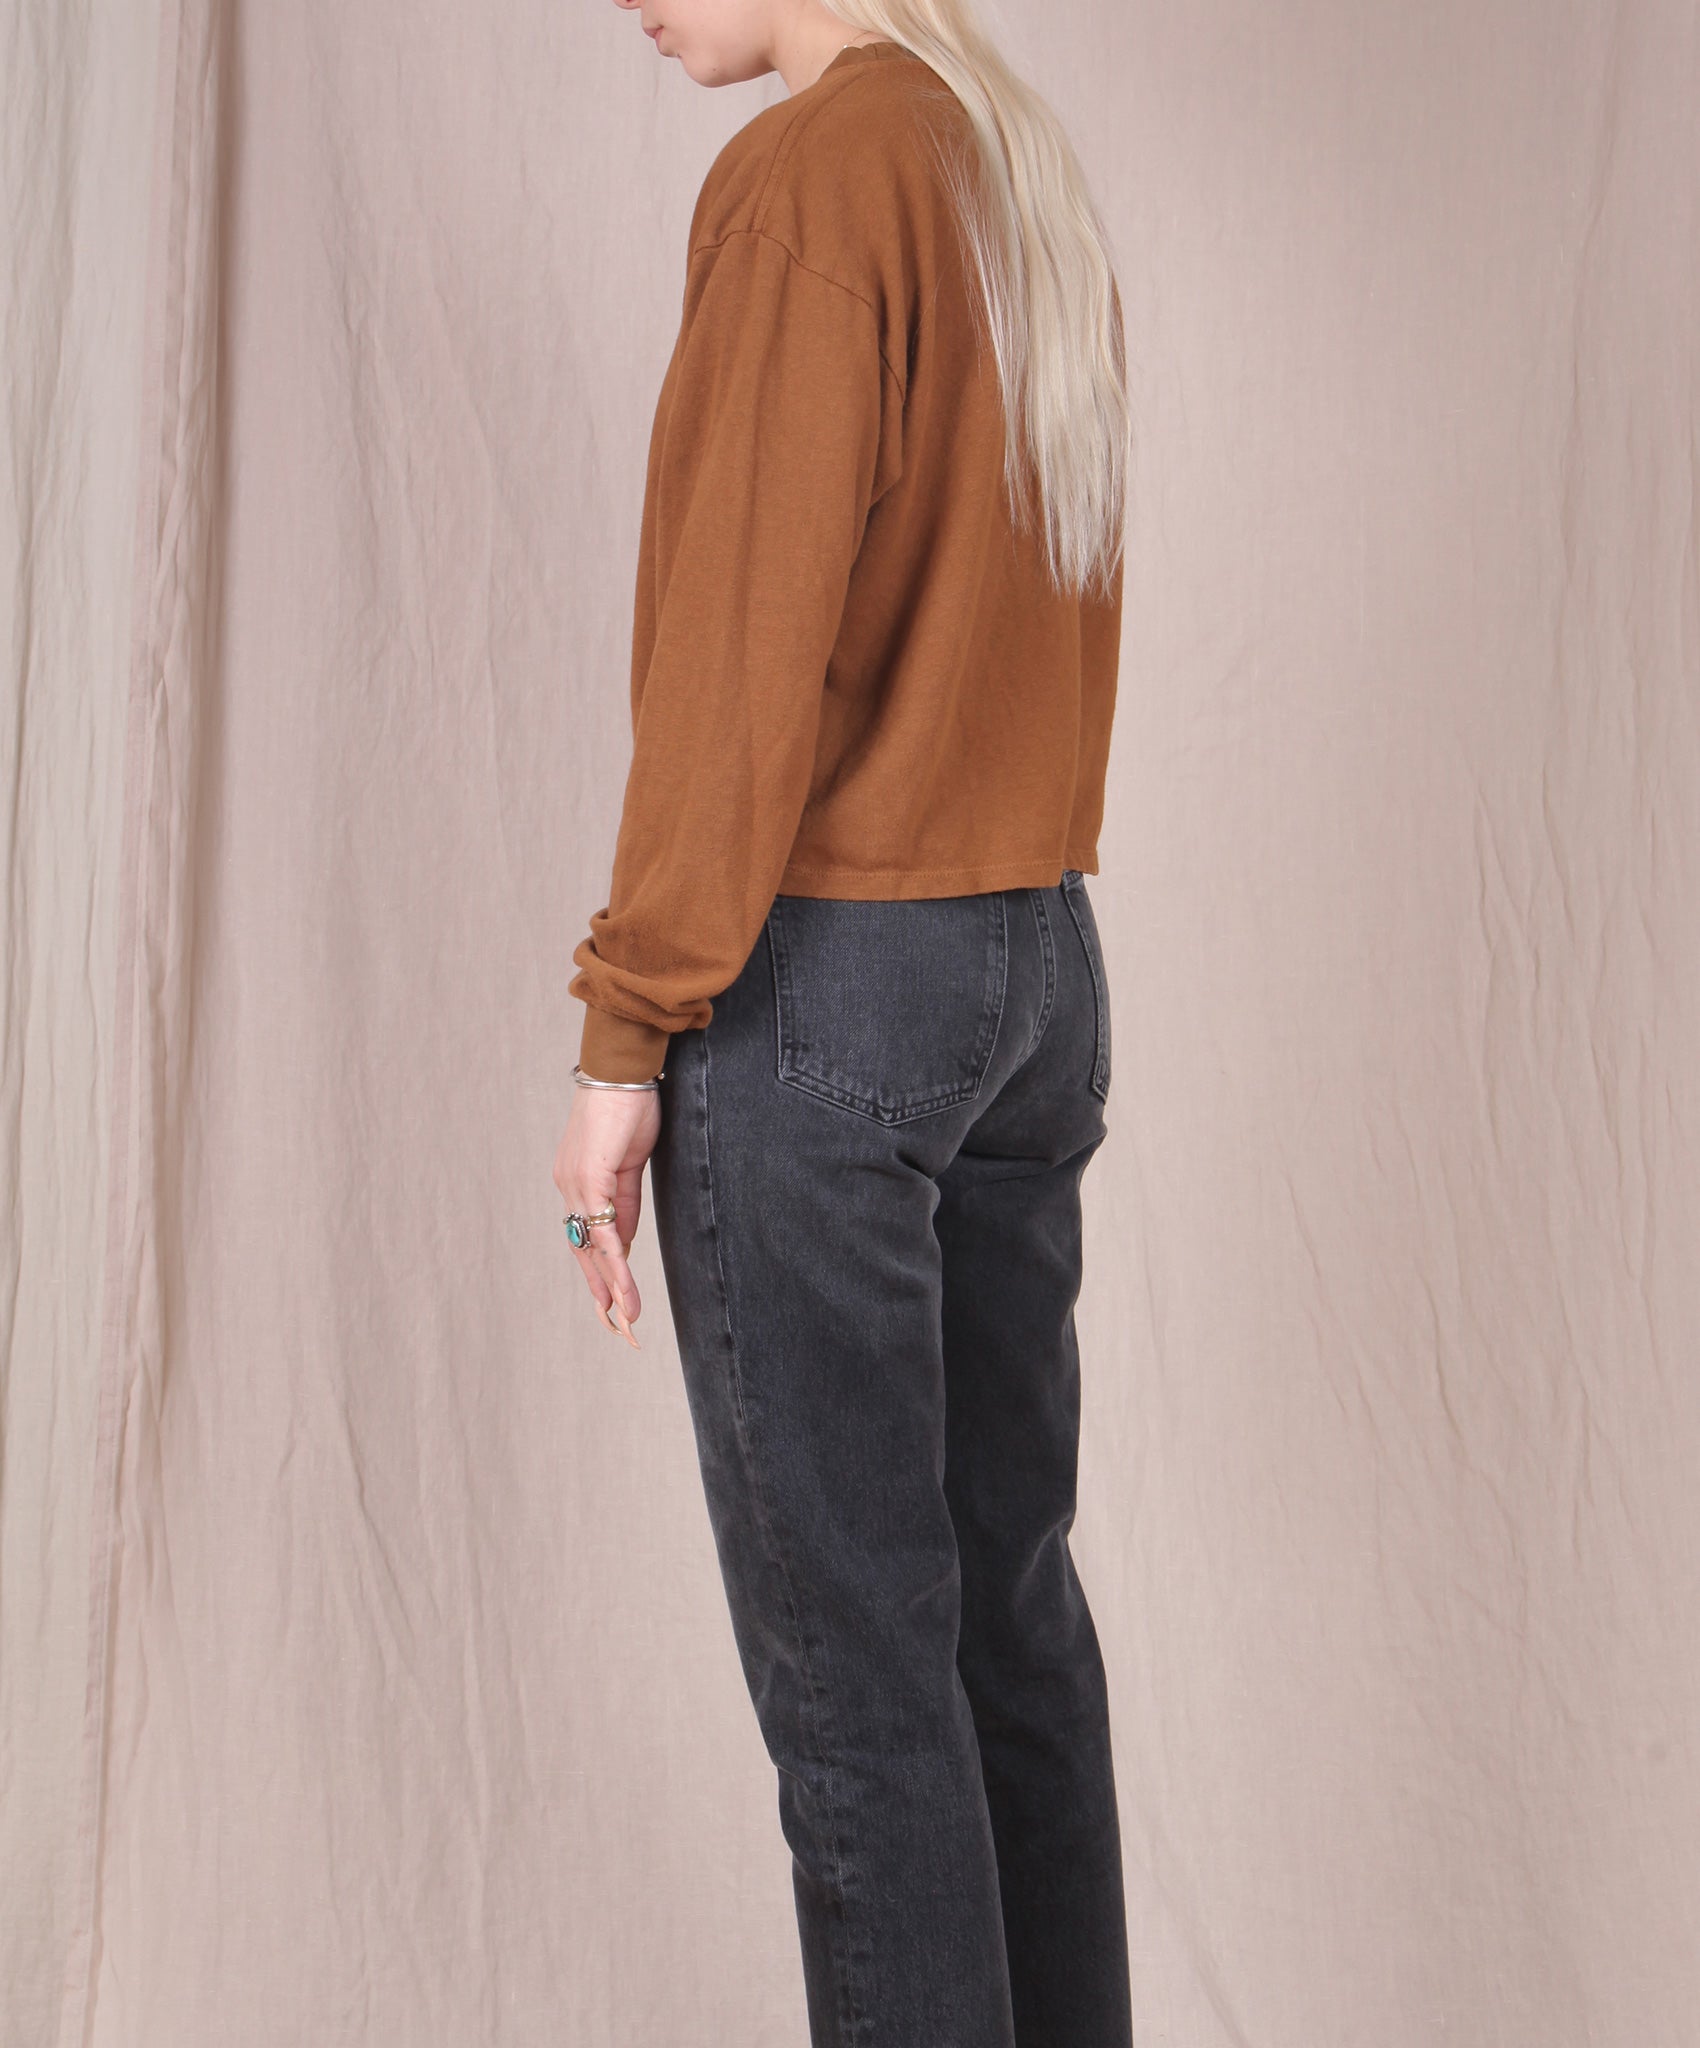 Jungmaven-Cropped Long Sleeve Tee // Copper